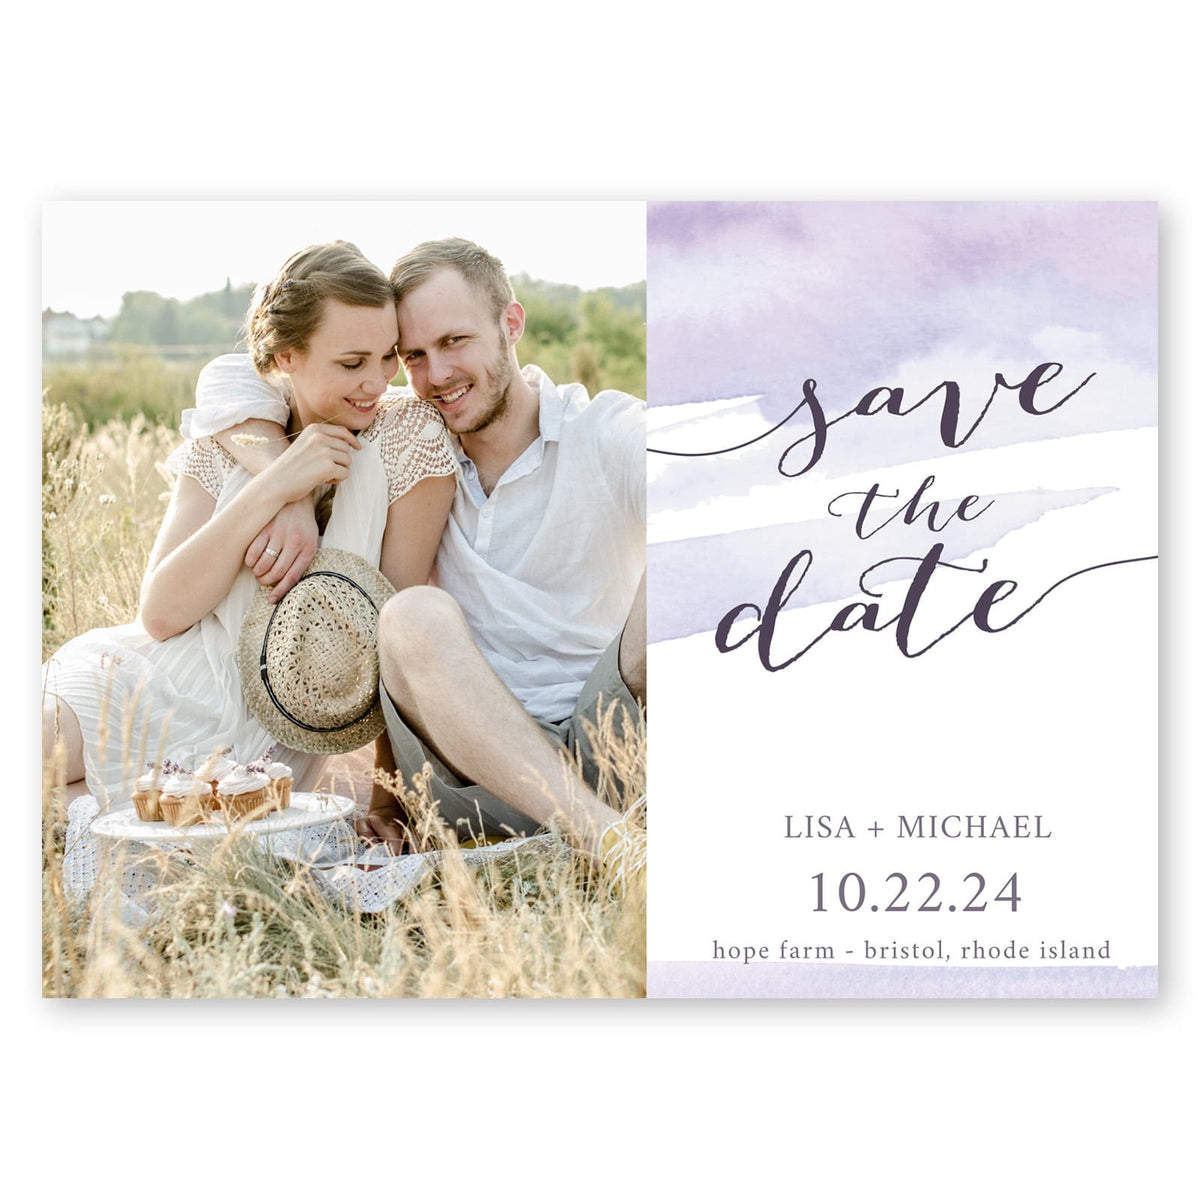 Watercolor Wash Save The Date Periwinkle Gartner Studios Save The Dates 96044